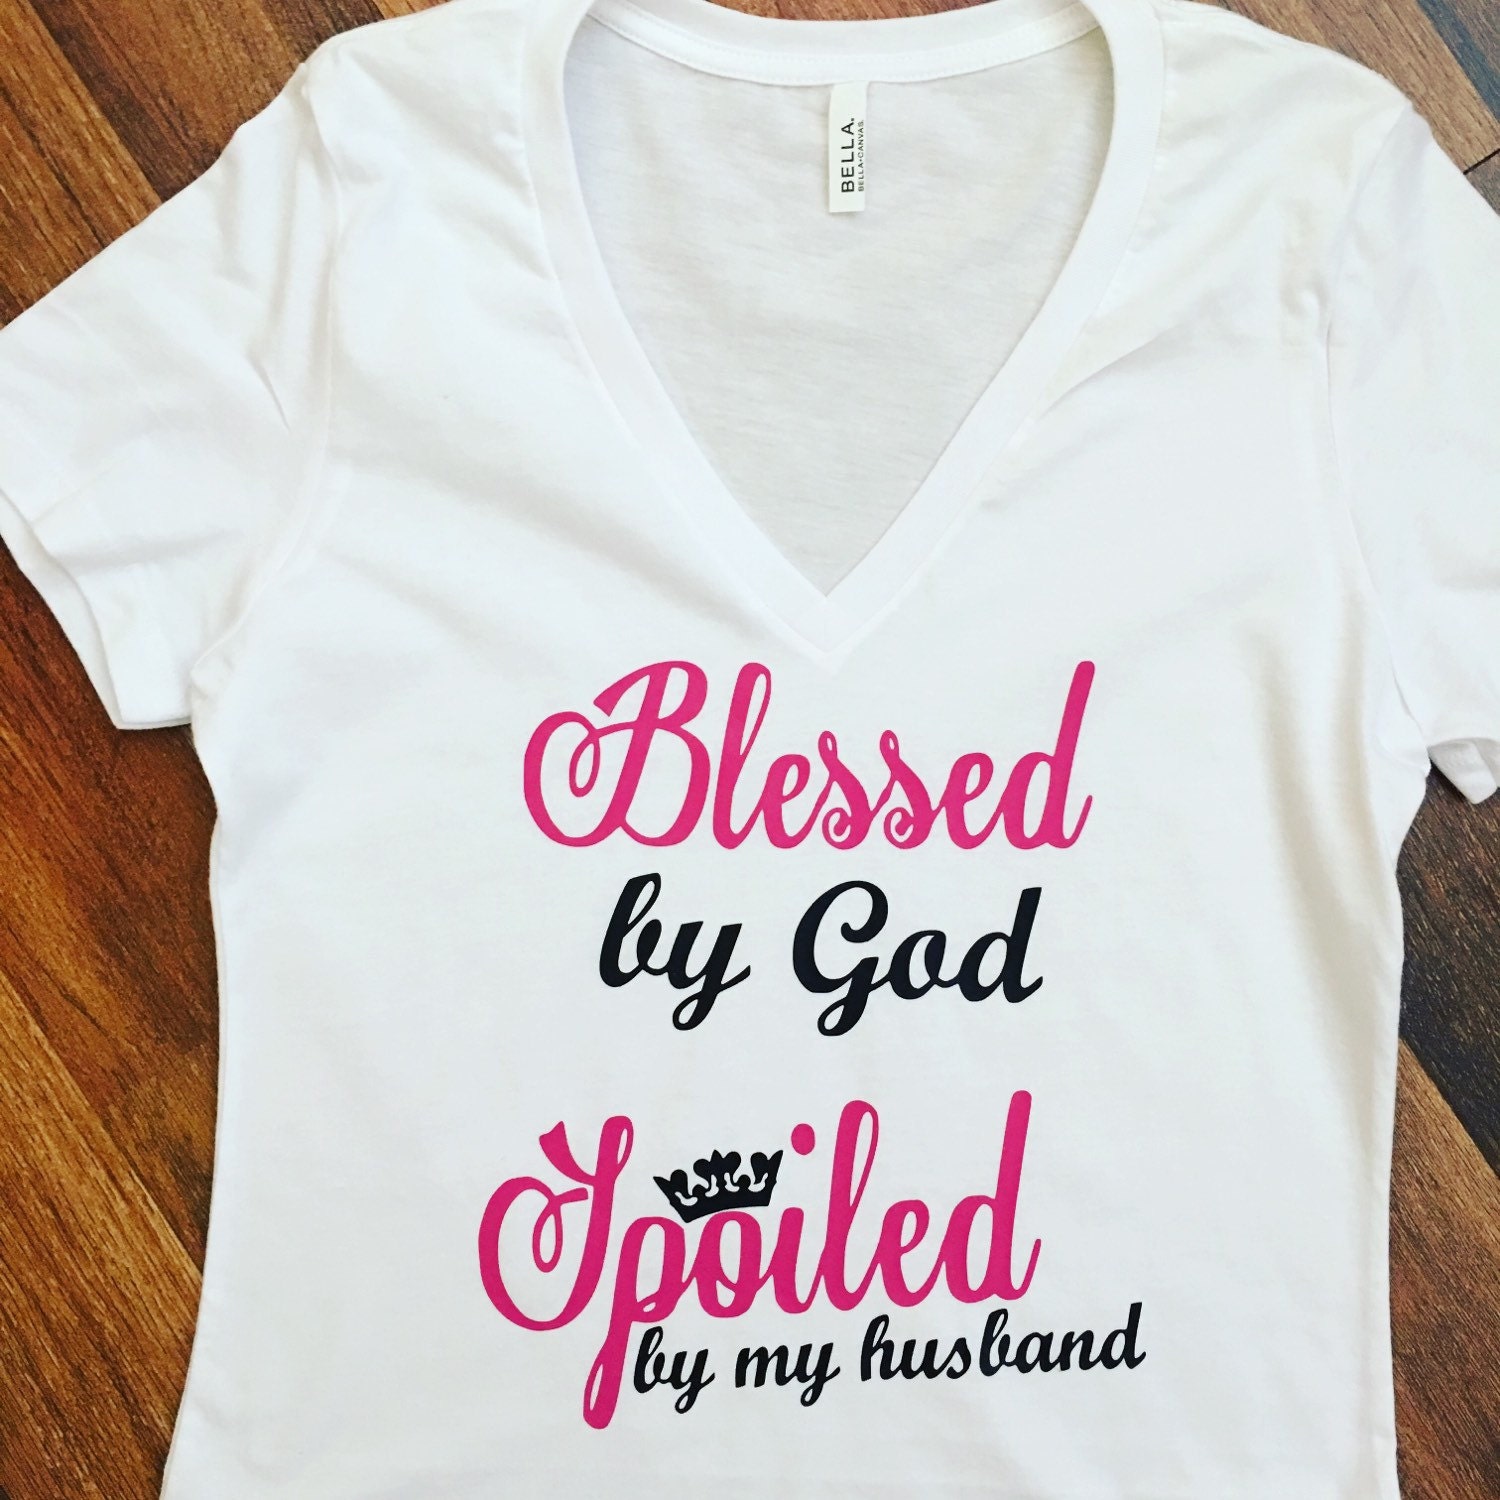 Free Free 301 Husband Svg Blessed By God Spoiled By My Husband SVG PNG EPS DXF File